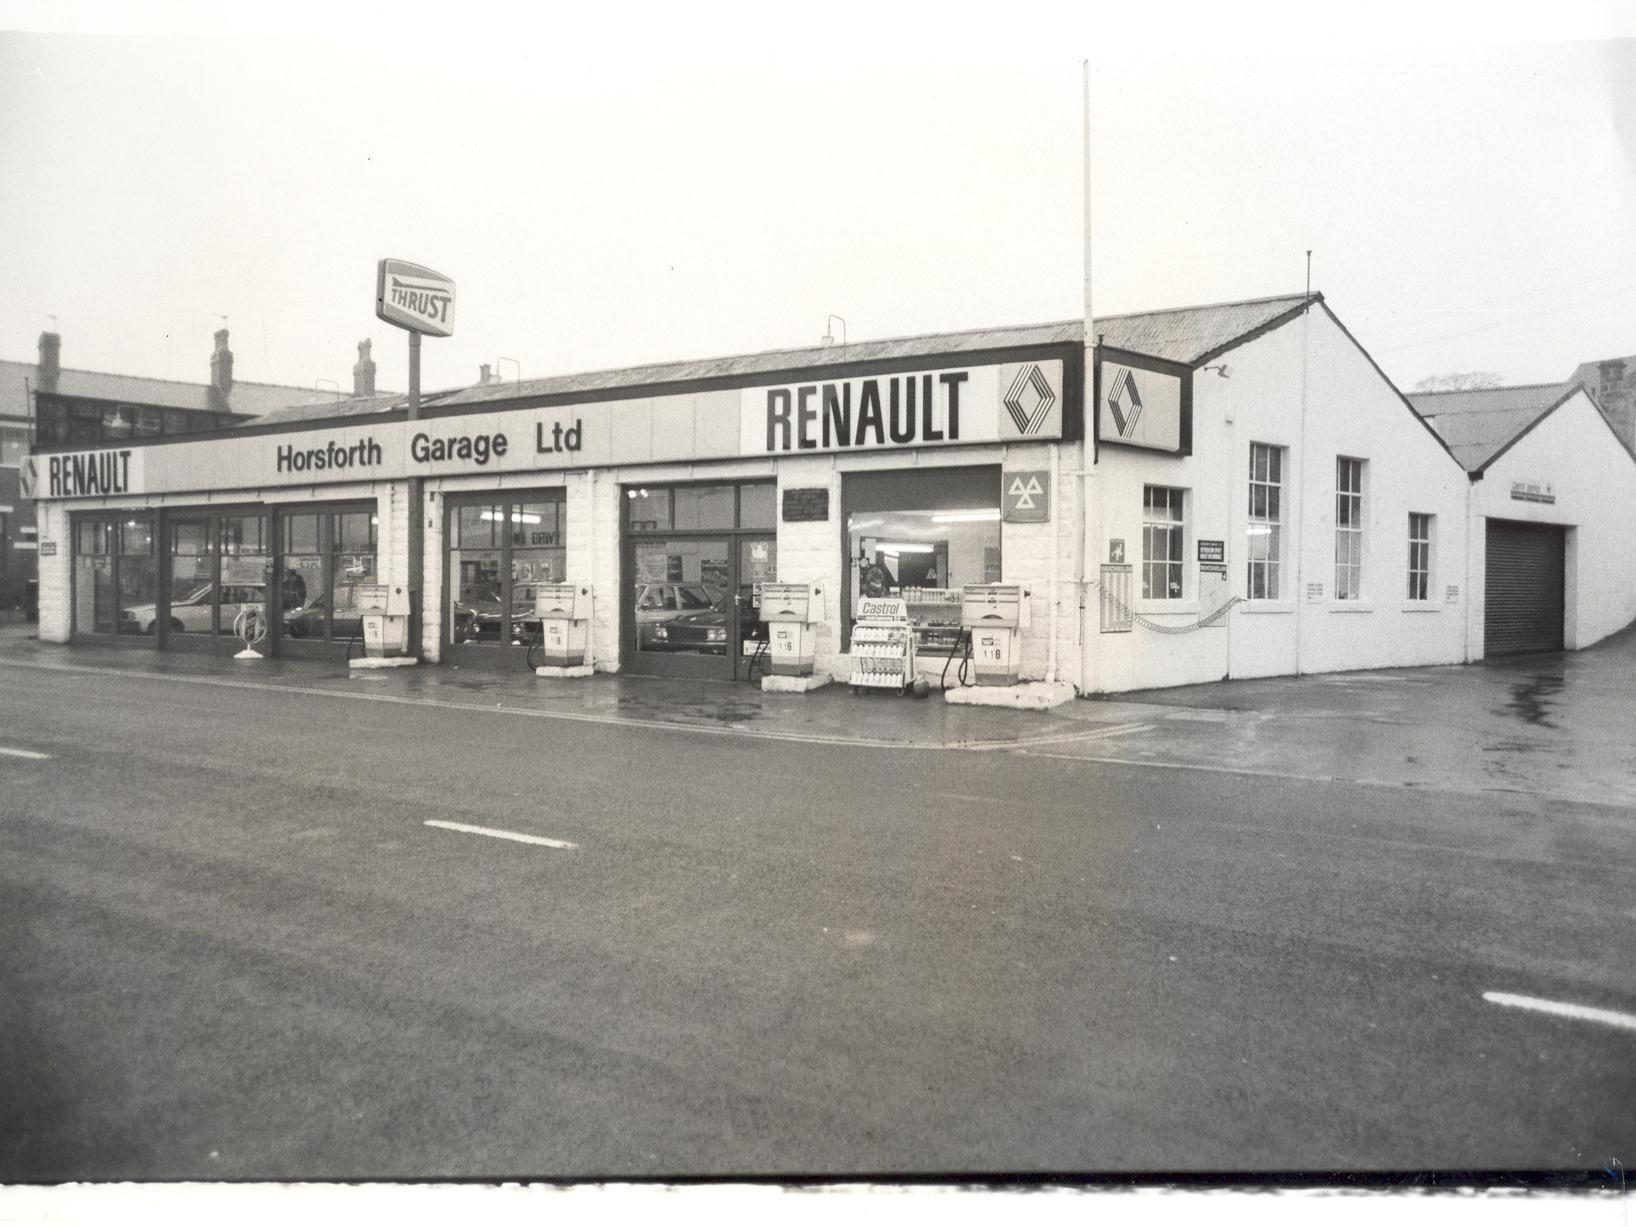 Did you buy a car from this Renault franchise?